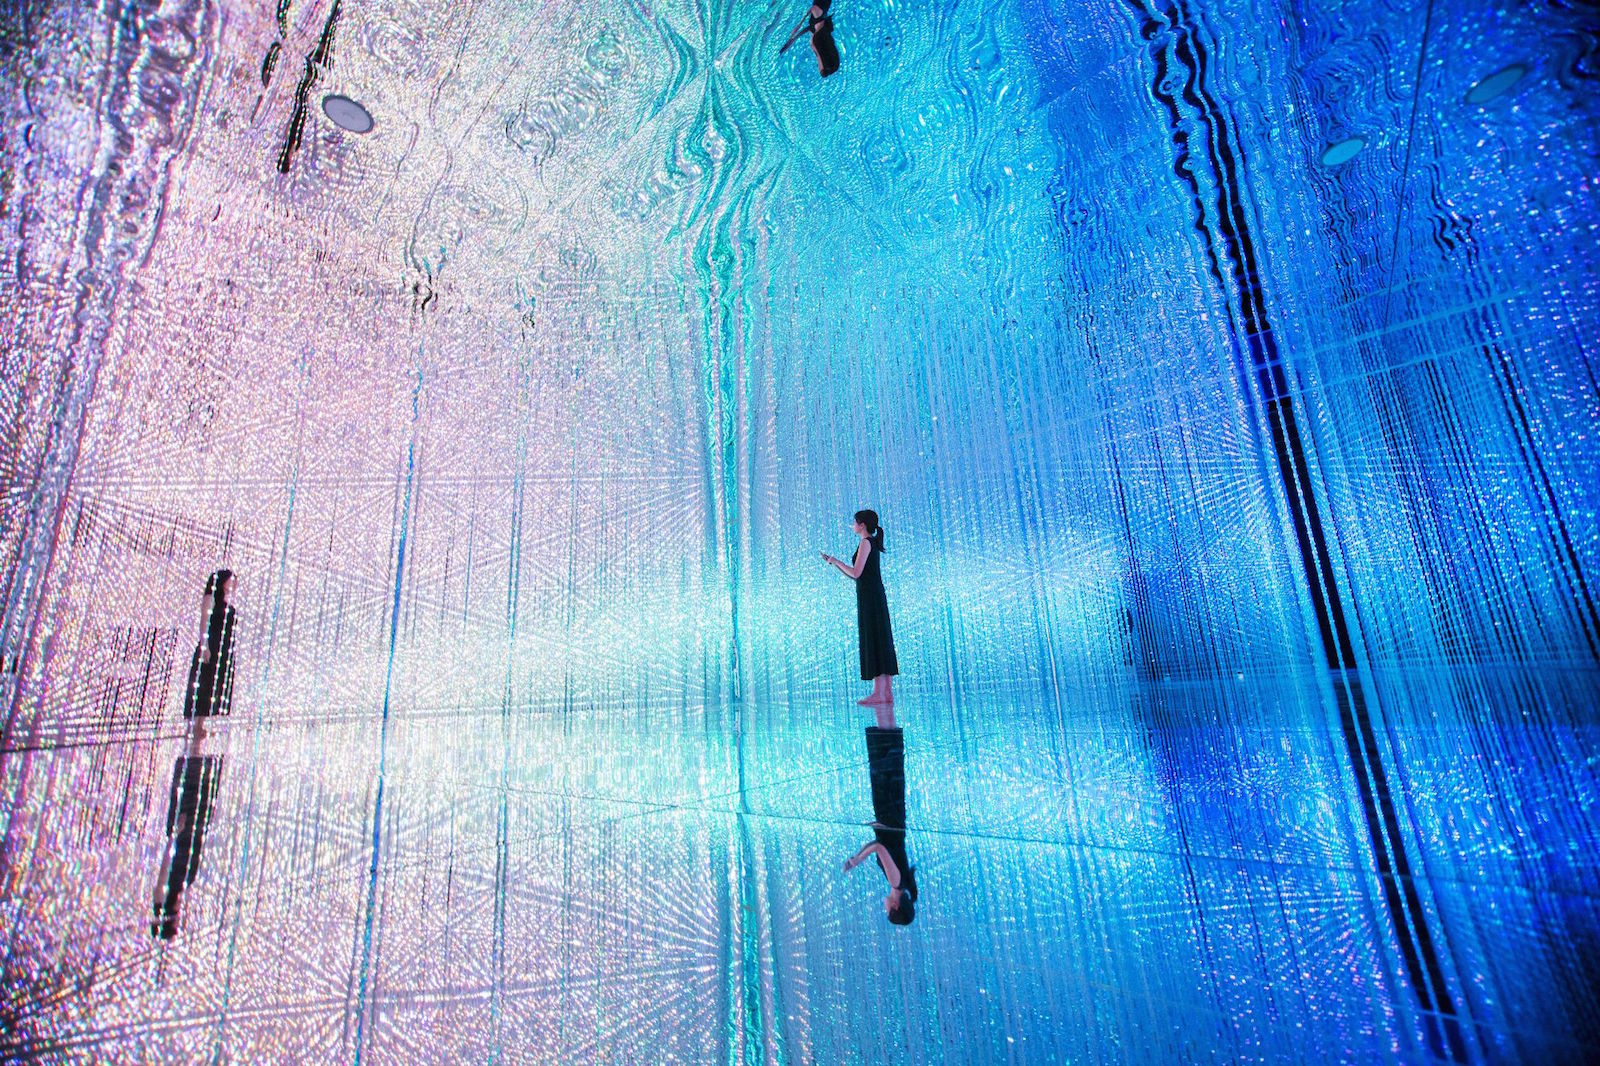 world of wonders by teamlab featured